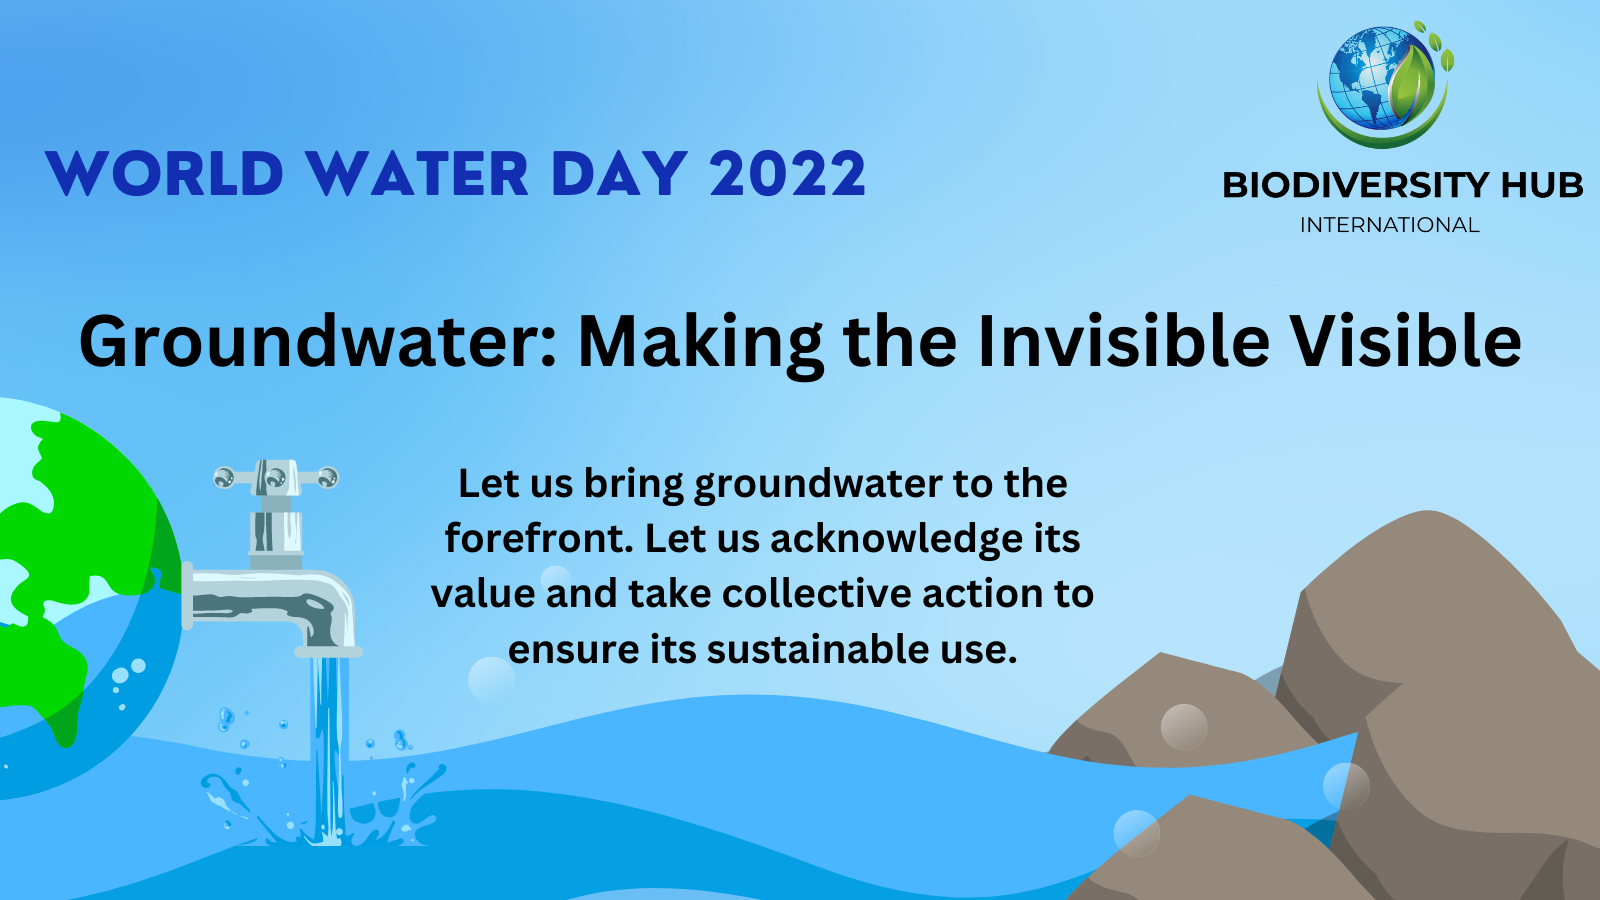 World Water Day 2022: Groundwater: Making the Invisible Visible